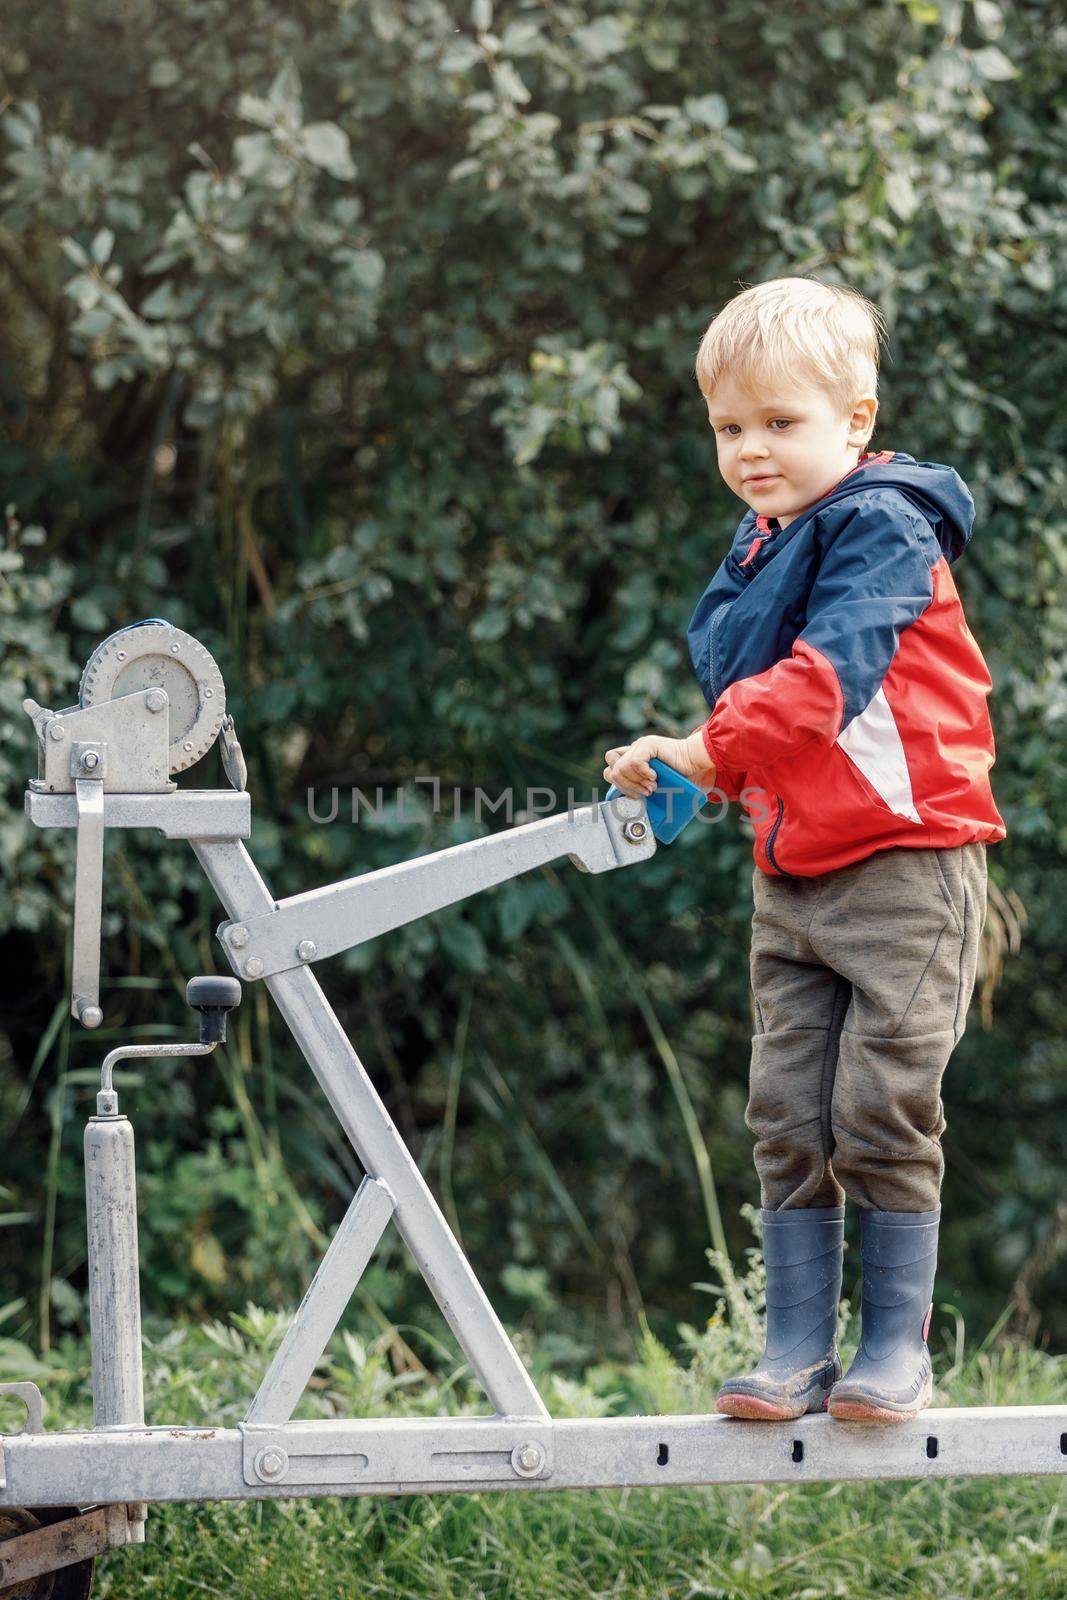 The little happy boy with rubber boots climbs on boat trailer winch and poses for the camera against a background of green foliage. Vertical photo.